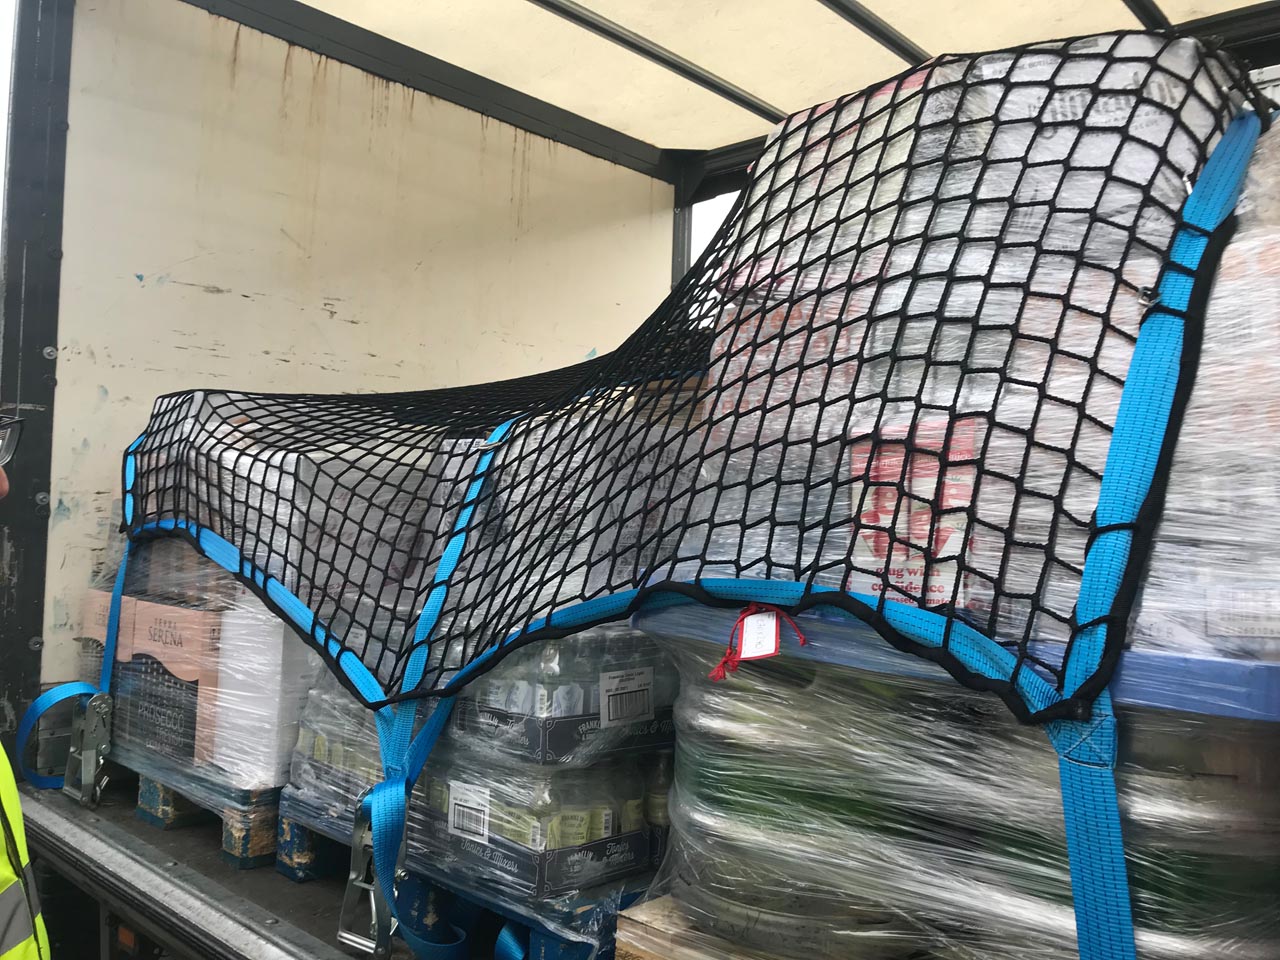 Heavy duty cargo net with webbing and integrated fittings in use as a pallet load control net.